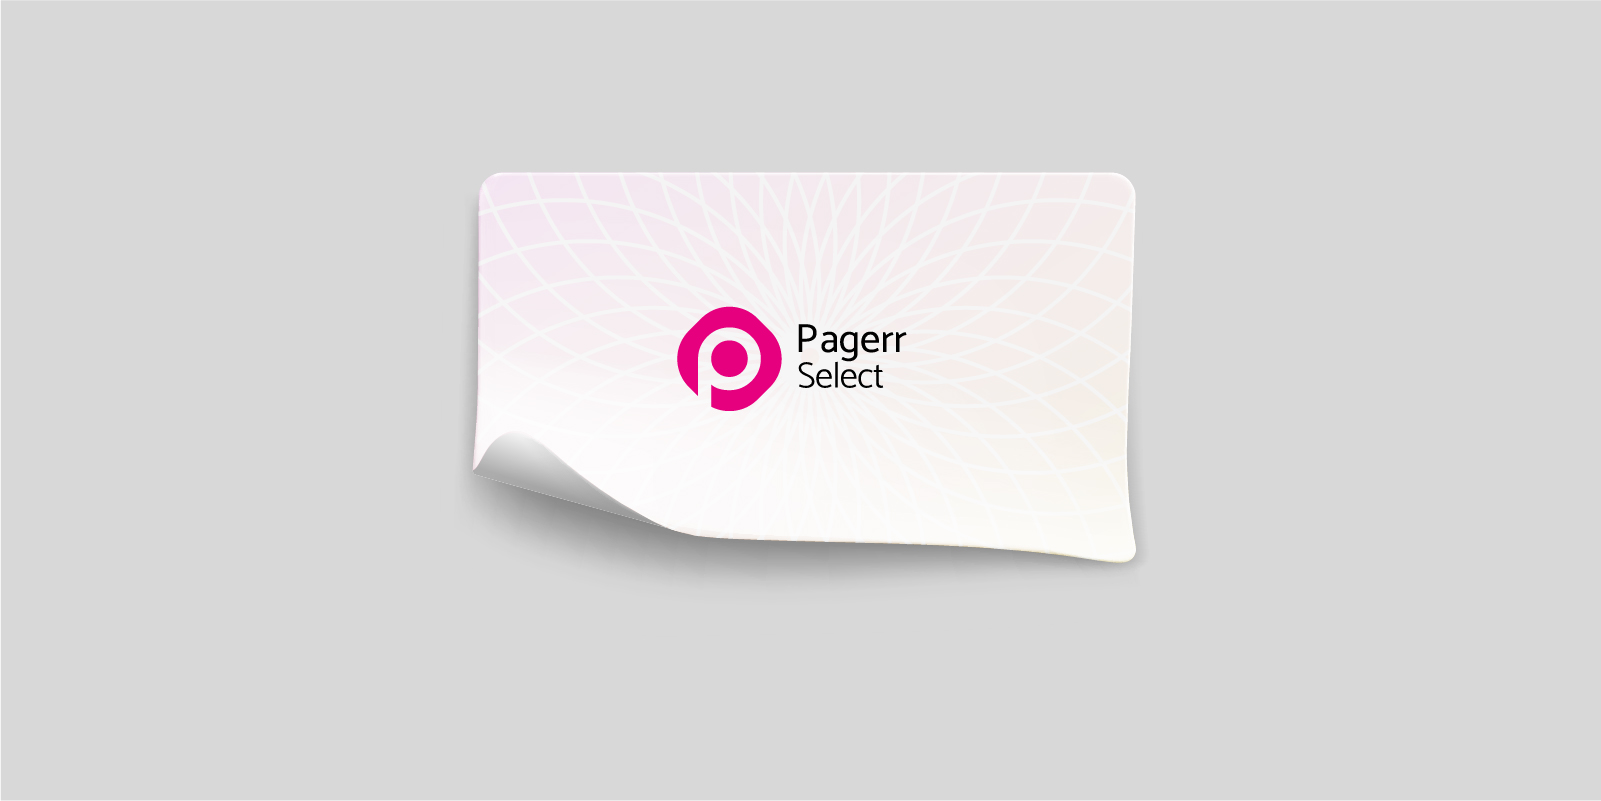 Sheet stickers in Canberra - Print with Pagerr